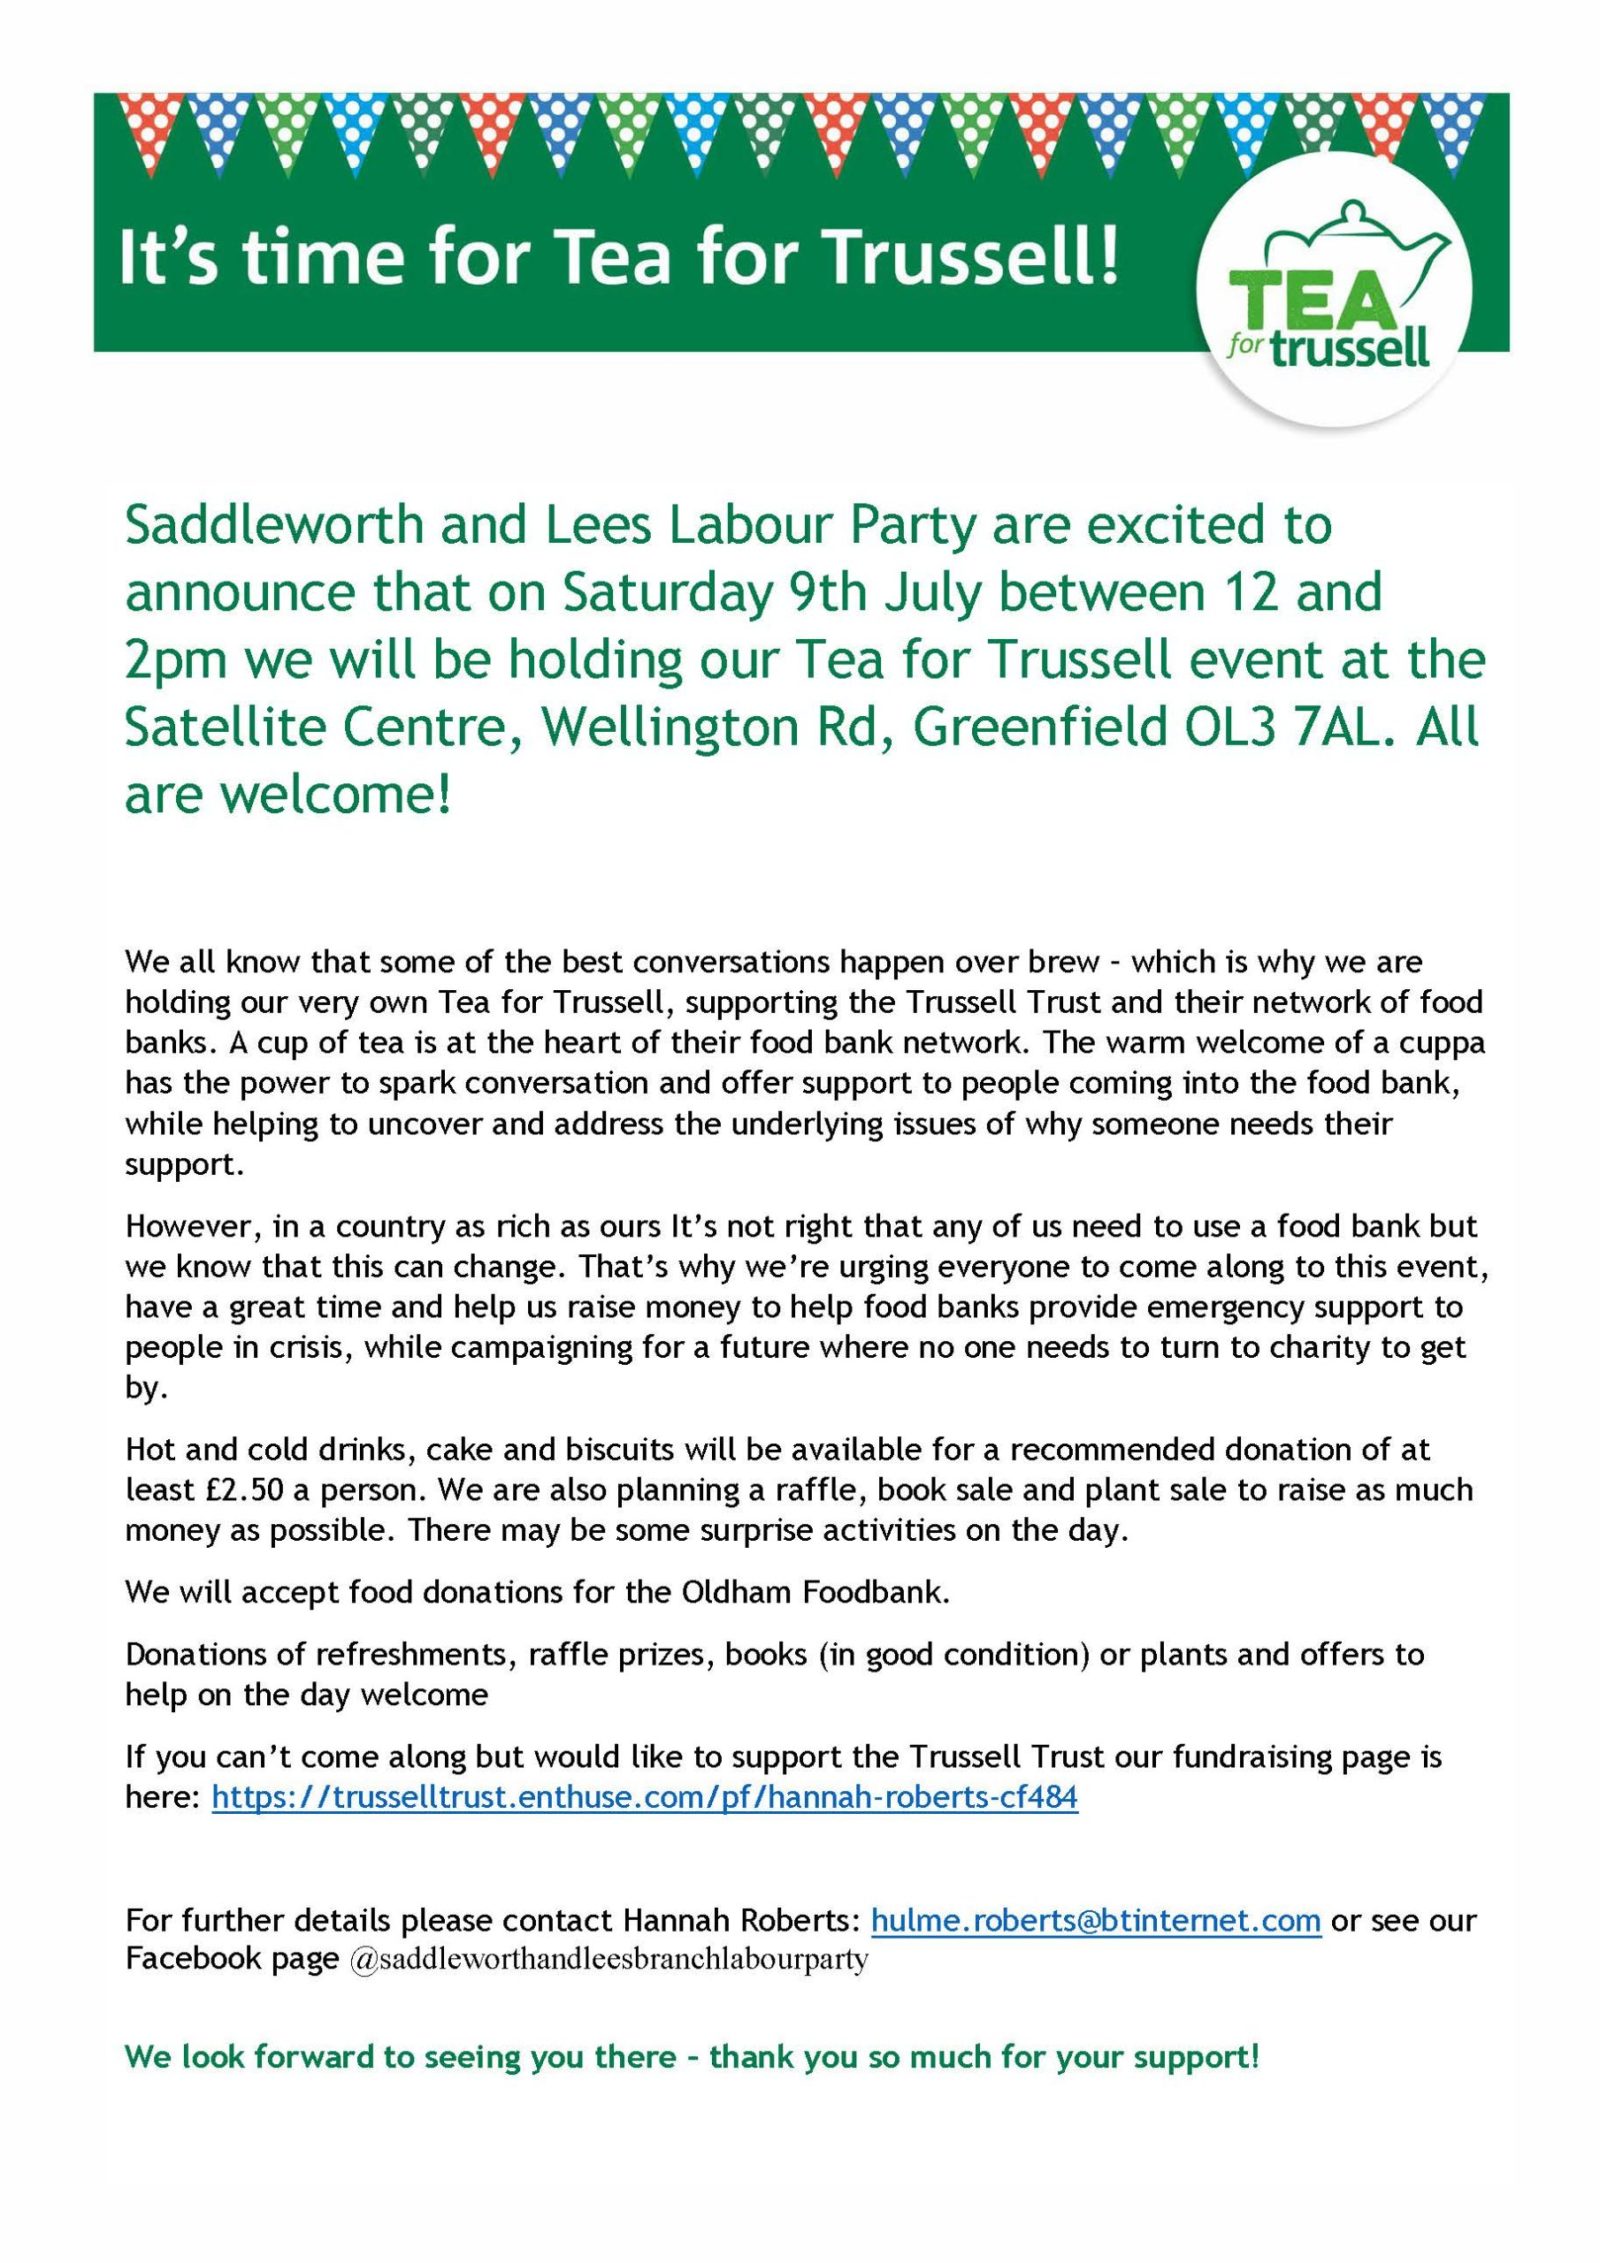 Saddleworth and Lees Labour Party are excited to announce that on Saturday 9th July between 12 and 2pm we will be holding our Tea for Trussell event at the Satellite Centre, Wellington Rd, Greenfield OL3 7AL. All are welcome! We all know that some of the best conversations happen over brew – which is why we are holding our very own Tea for Trussell, supporting the Trussell Trust and their network of food banks. A cup of tea is at the heart of their food bank network. The warm welcome of a cuppa has the power to spark conversation and offer support to people coming into the food bank, while helping to uncover and address the underlying issues of why someone needs their support. However, in a country as rich as ours It’s not right that any of us need to use a food bank but we know that this can change. That’s why we’re urging everyone to come along to this event, have a great time and help us raise money to help food banks provide emergency support to people in crisis, while campaigning for a future where no one needs to turn to charity to get by. Hot and cold drinks, cake and biscuits will be available for a recommended donation of at least £2.50 a person. We are also planning a raffle, book sale and plant sale to raise as much money as possible. There may be some surprise activities on the day. We will accept food donations for the Oldham Foodbank. Donations of refreshments, raffle prizes, books (in good condition) or plants and offers to help on the day welcome If you can’t come along but would like to support the Trussell Trust our fundraising page is here: https://trusselltrust.enthuse.com/pf/hannah-roberts-cf484 For further details please contact Hannah Roberts: hulme.roberts@btinternet.com or see our Facebook page @saddleworthandleesbranchlabourparty We look forward to seeing you there – thank you so much for your support!